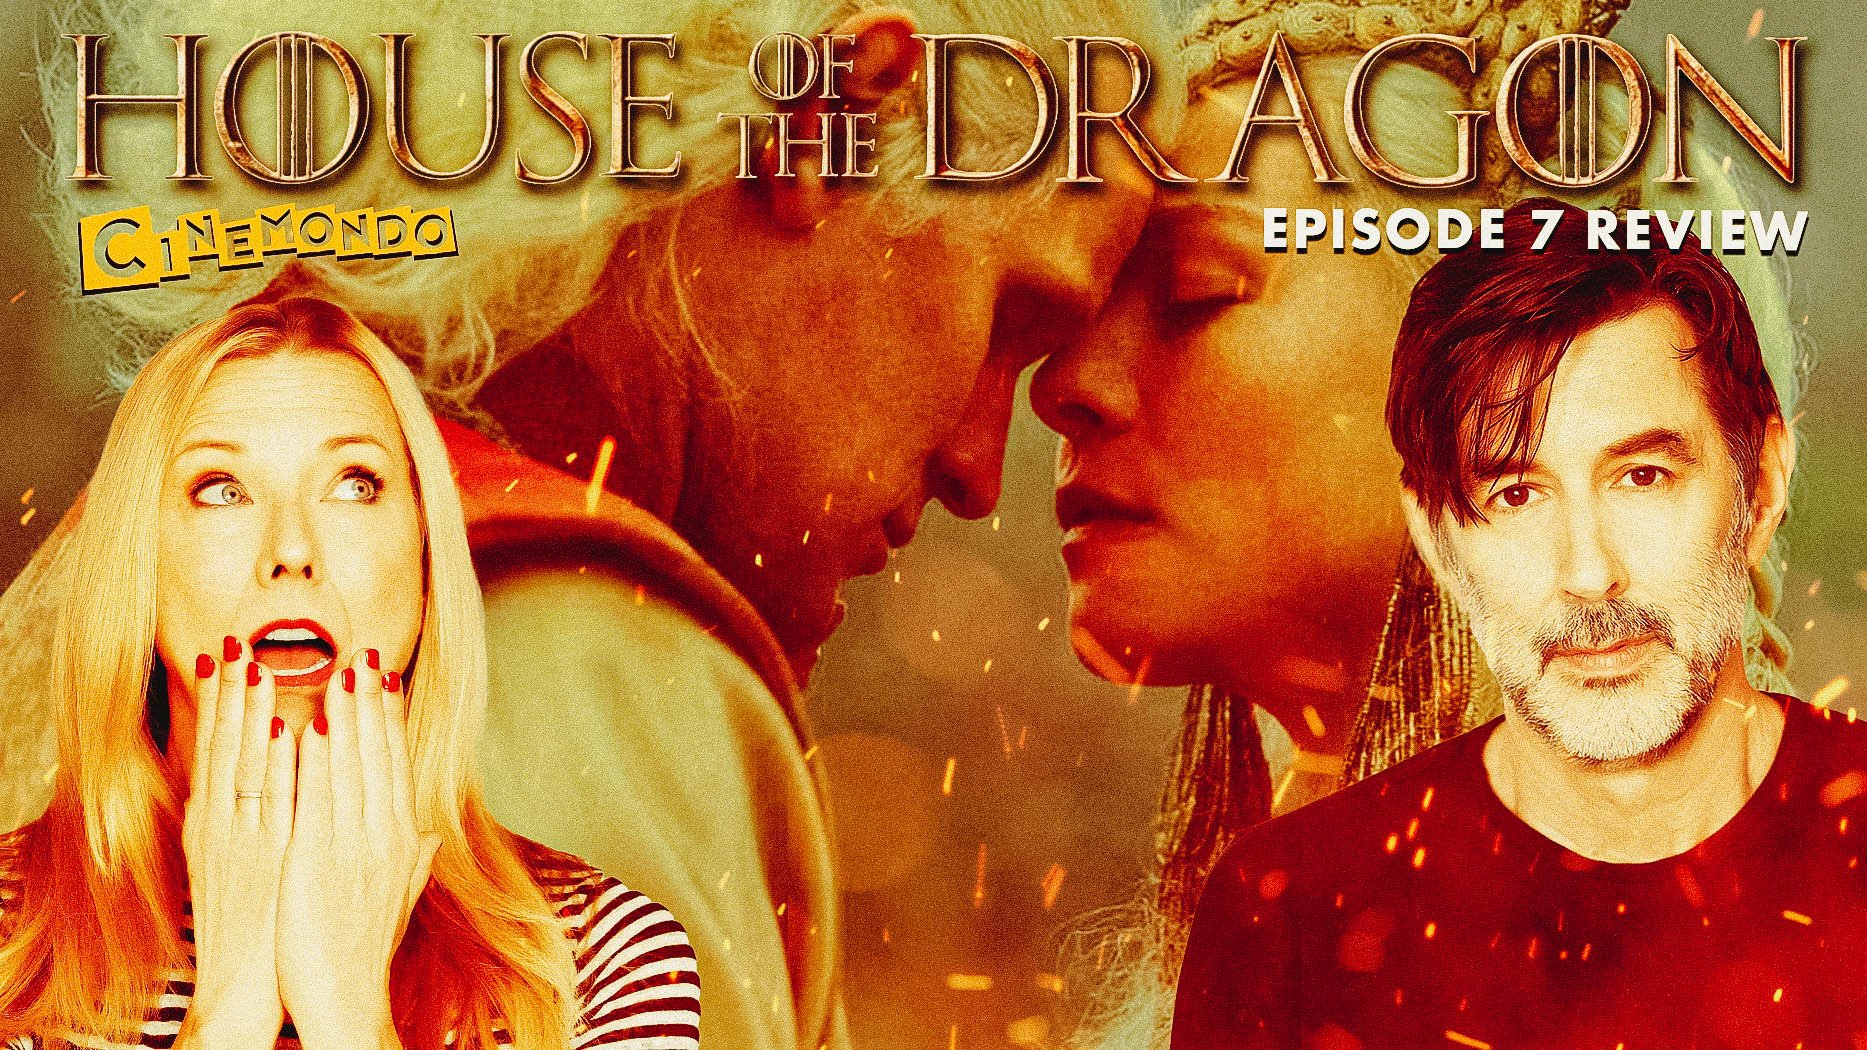 House of the Dragon Episode 1 Review! — CINEMONDO PODCAST